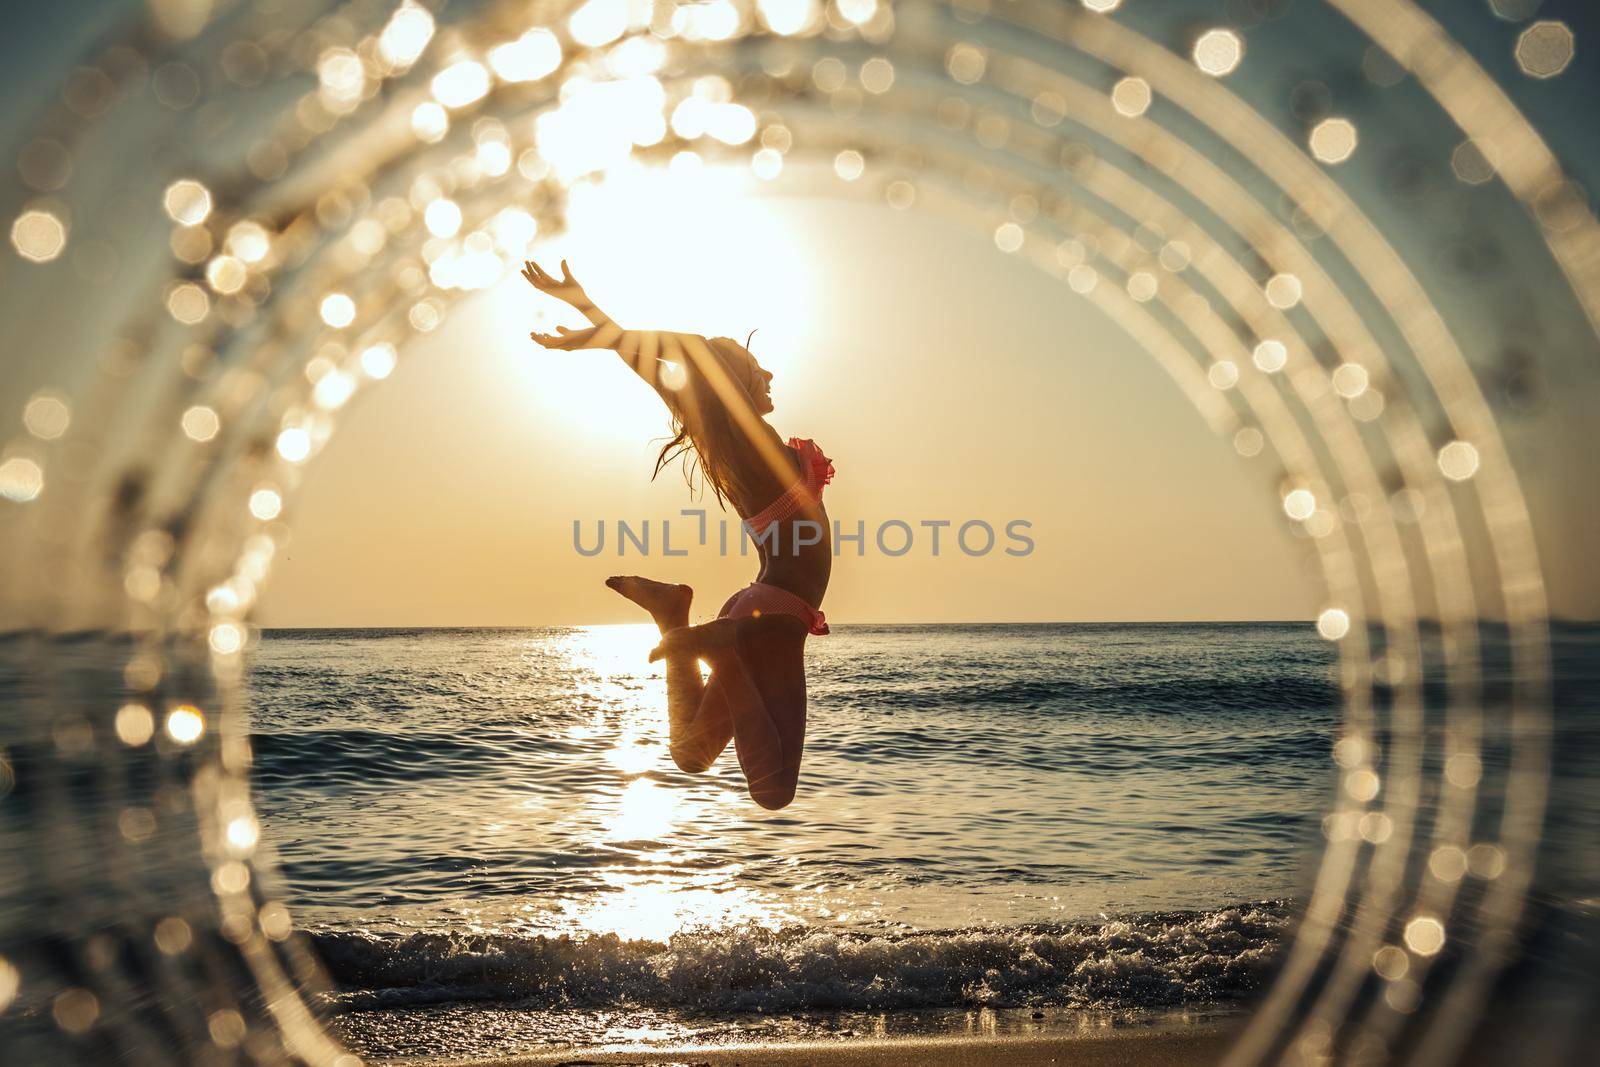 A beautiful creative composition of a sea landscape shot through a circle focus showing a teenage girl who having fun on the beach in sunset.